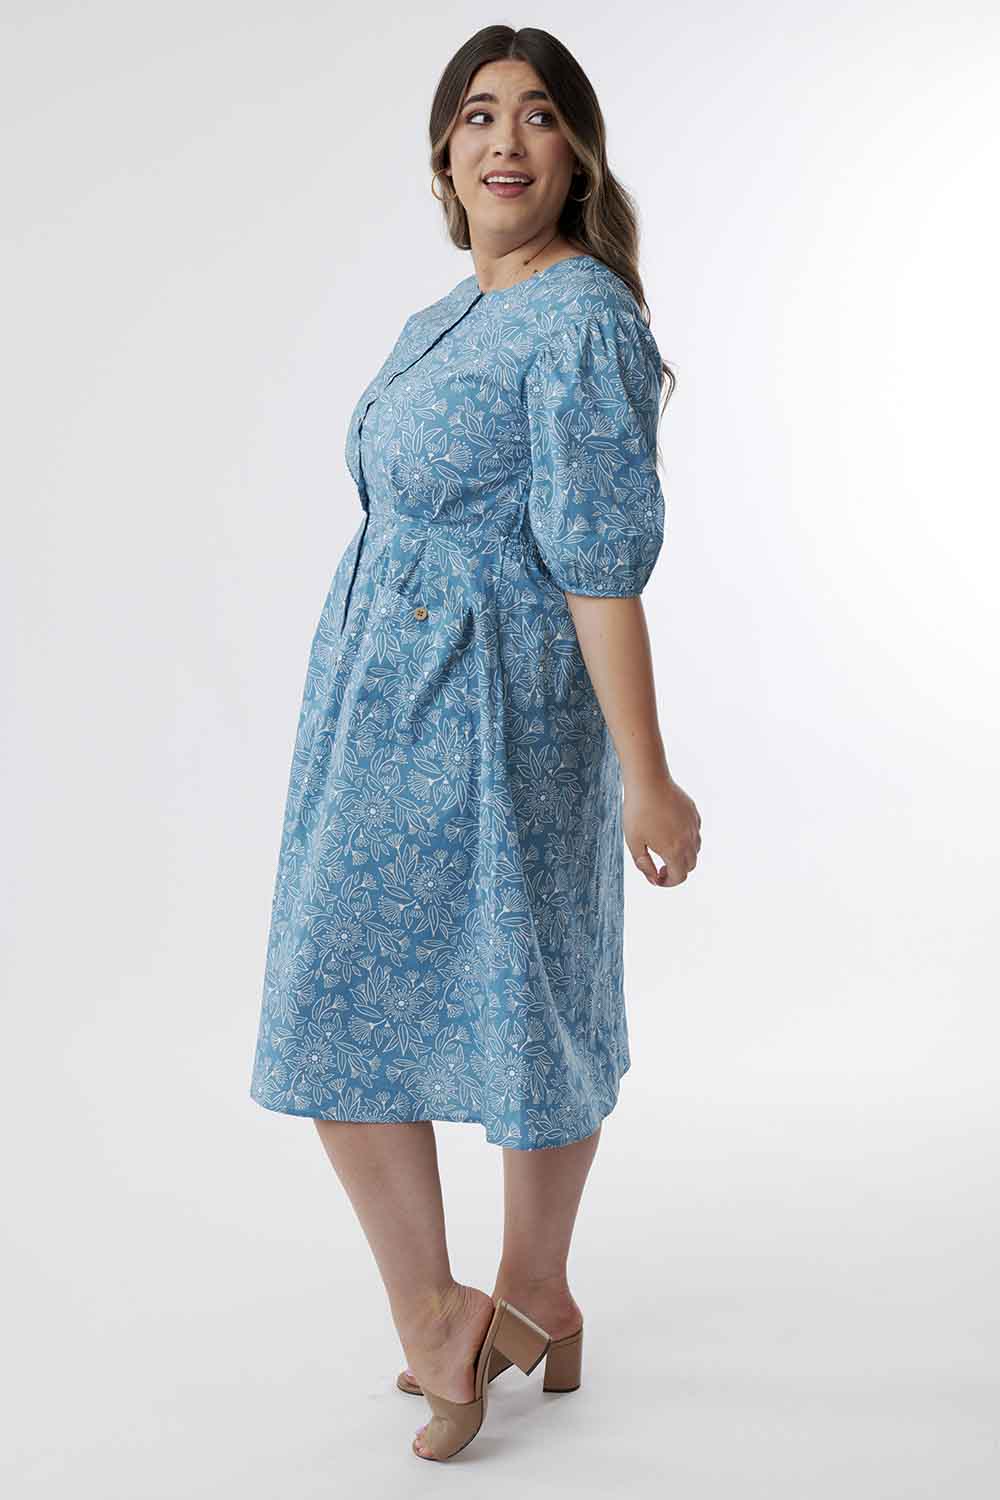 Always Ready Blue Floral Buttoned Midi Dress